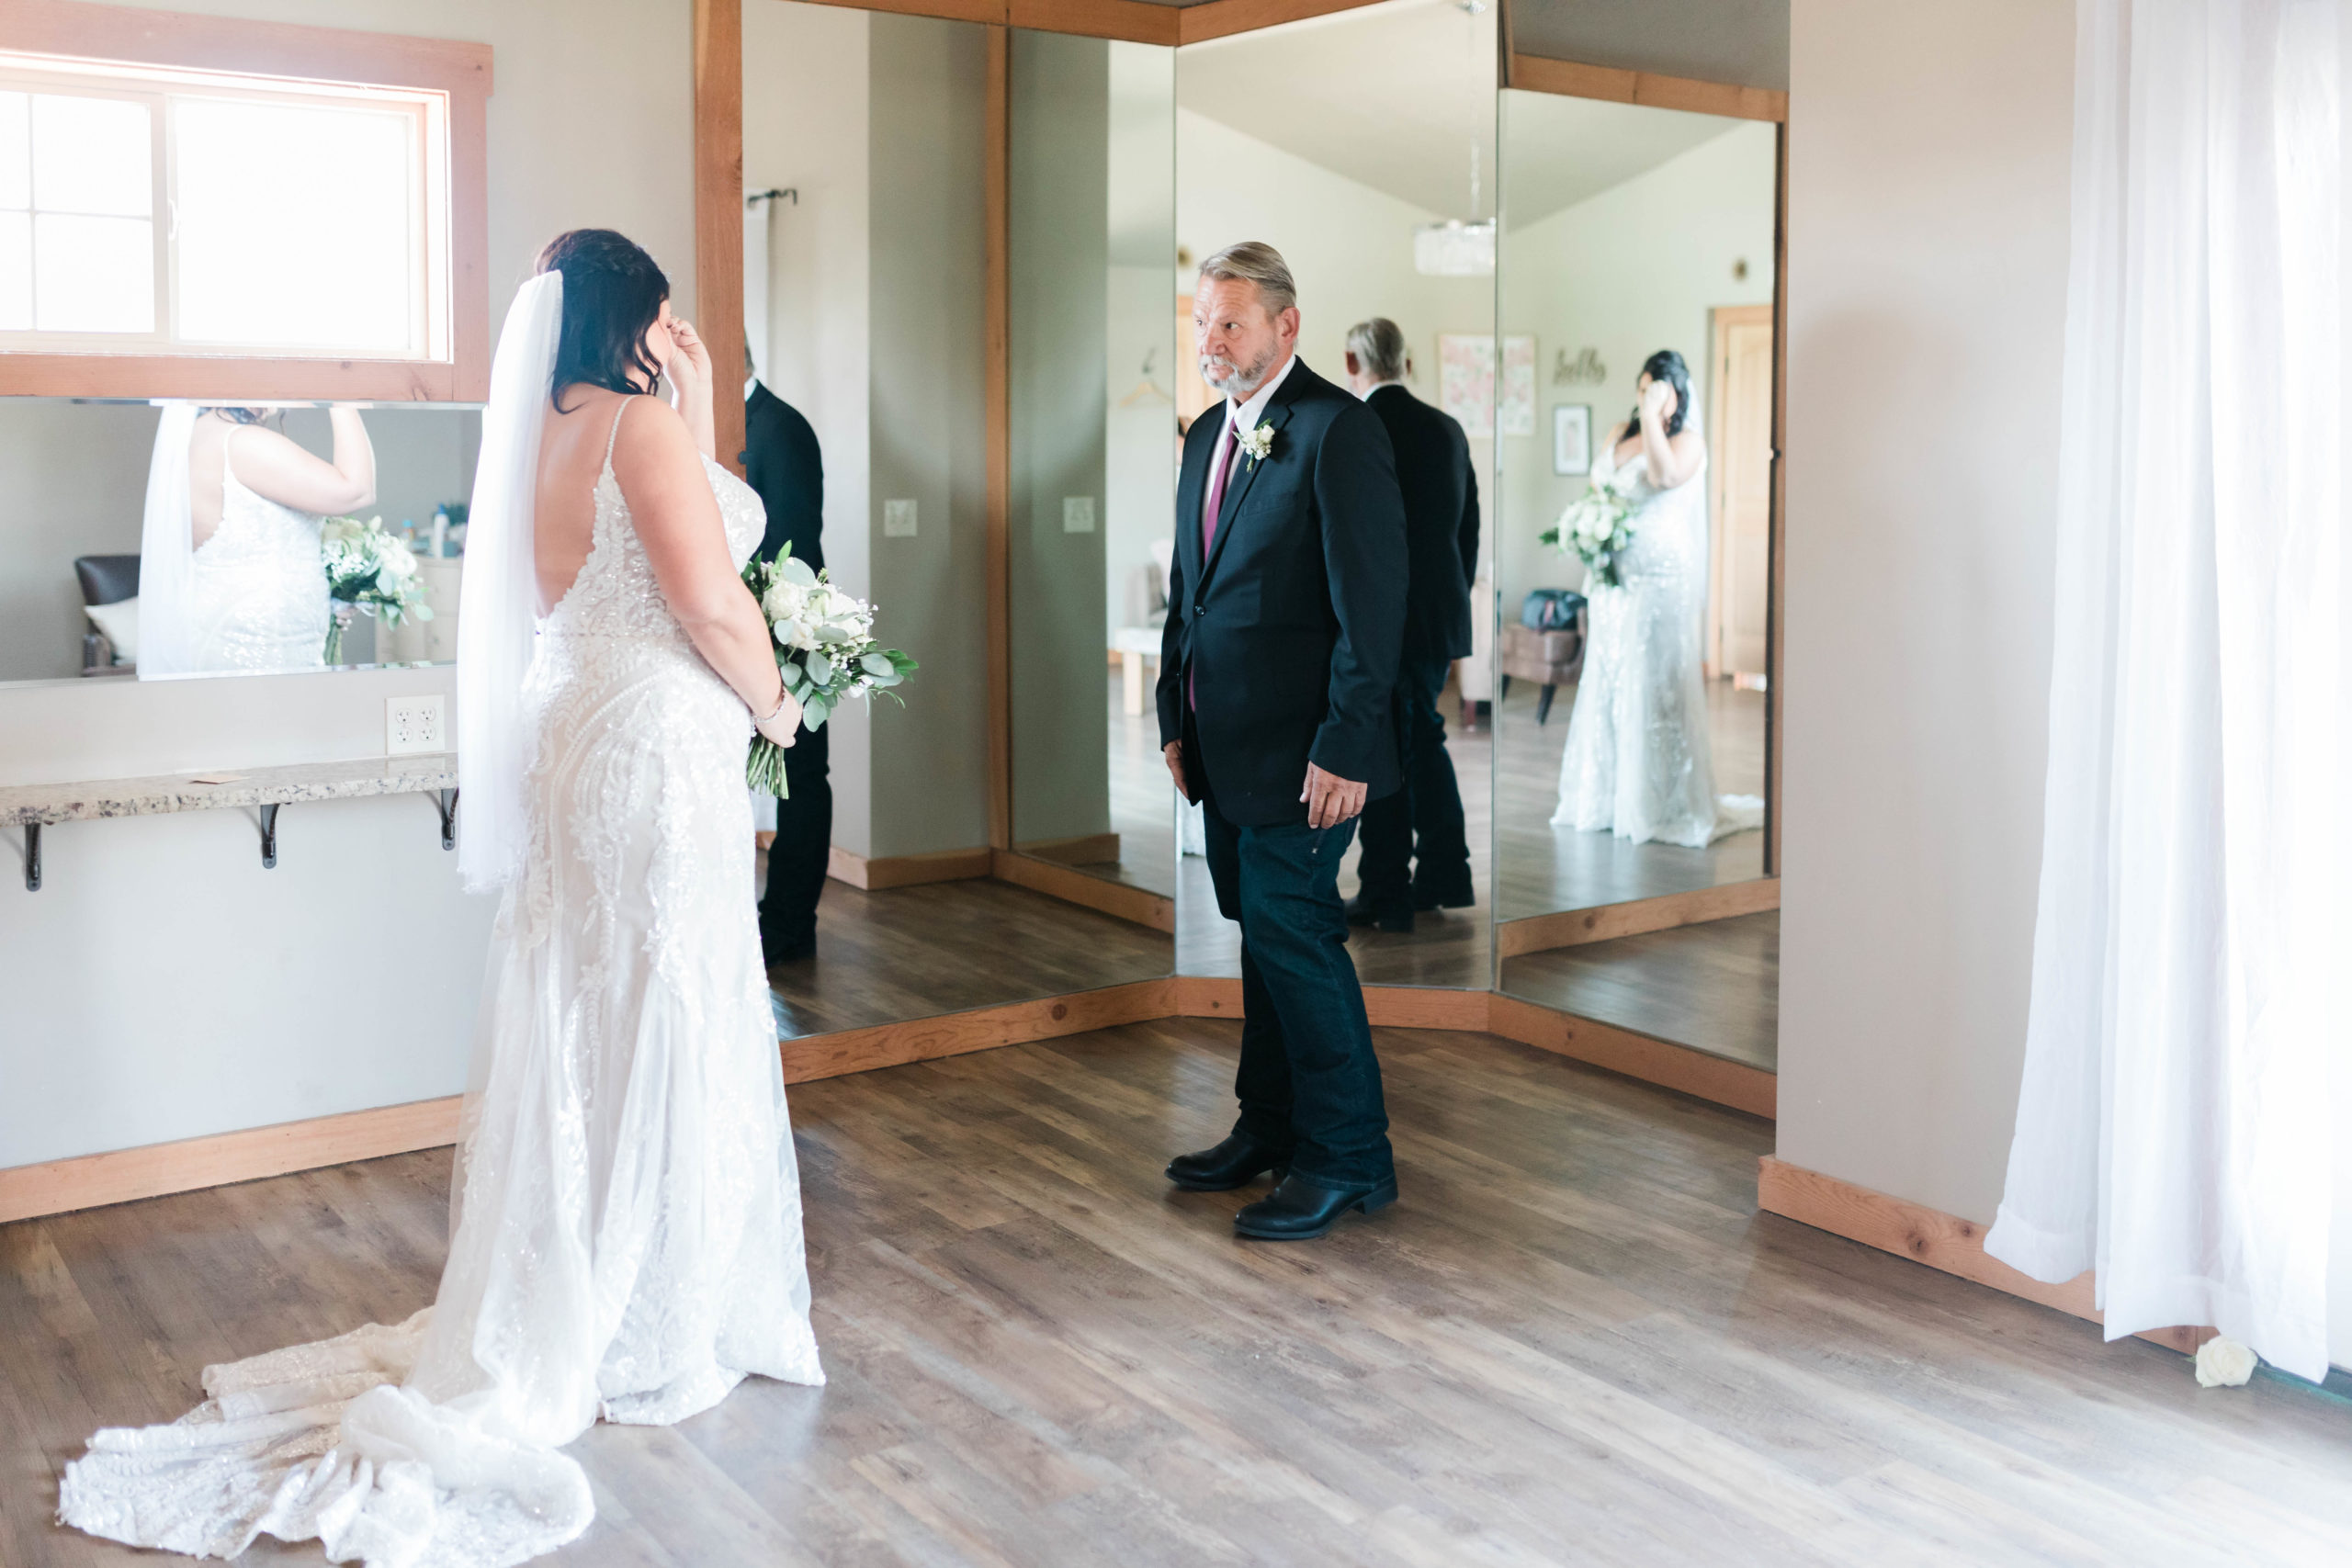 Boise wedding photographer captures first look between bride and father on wedding day